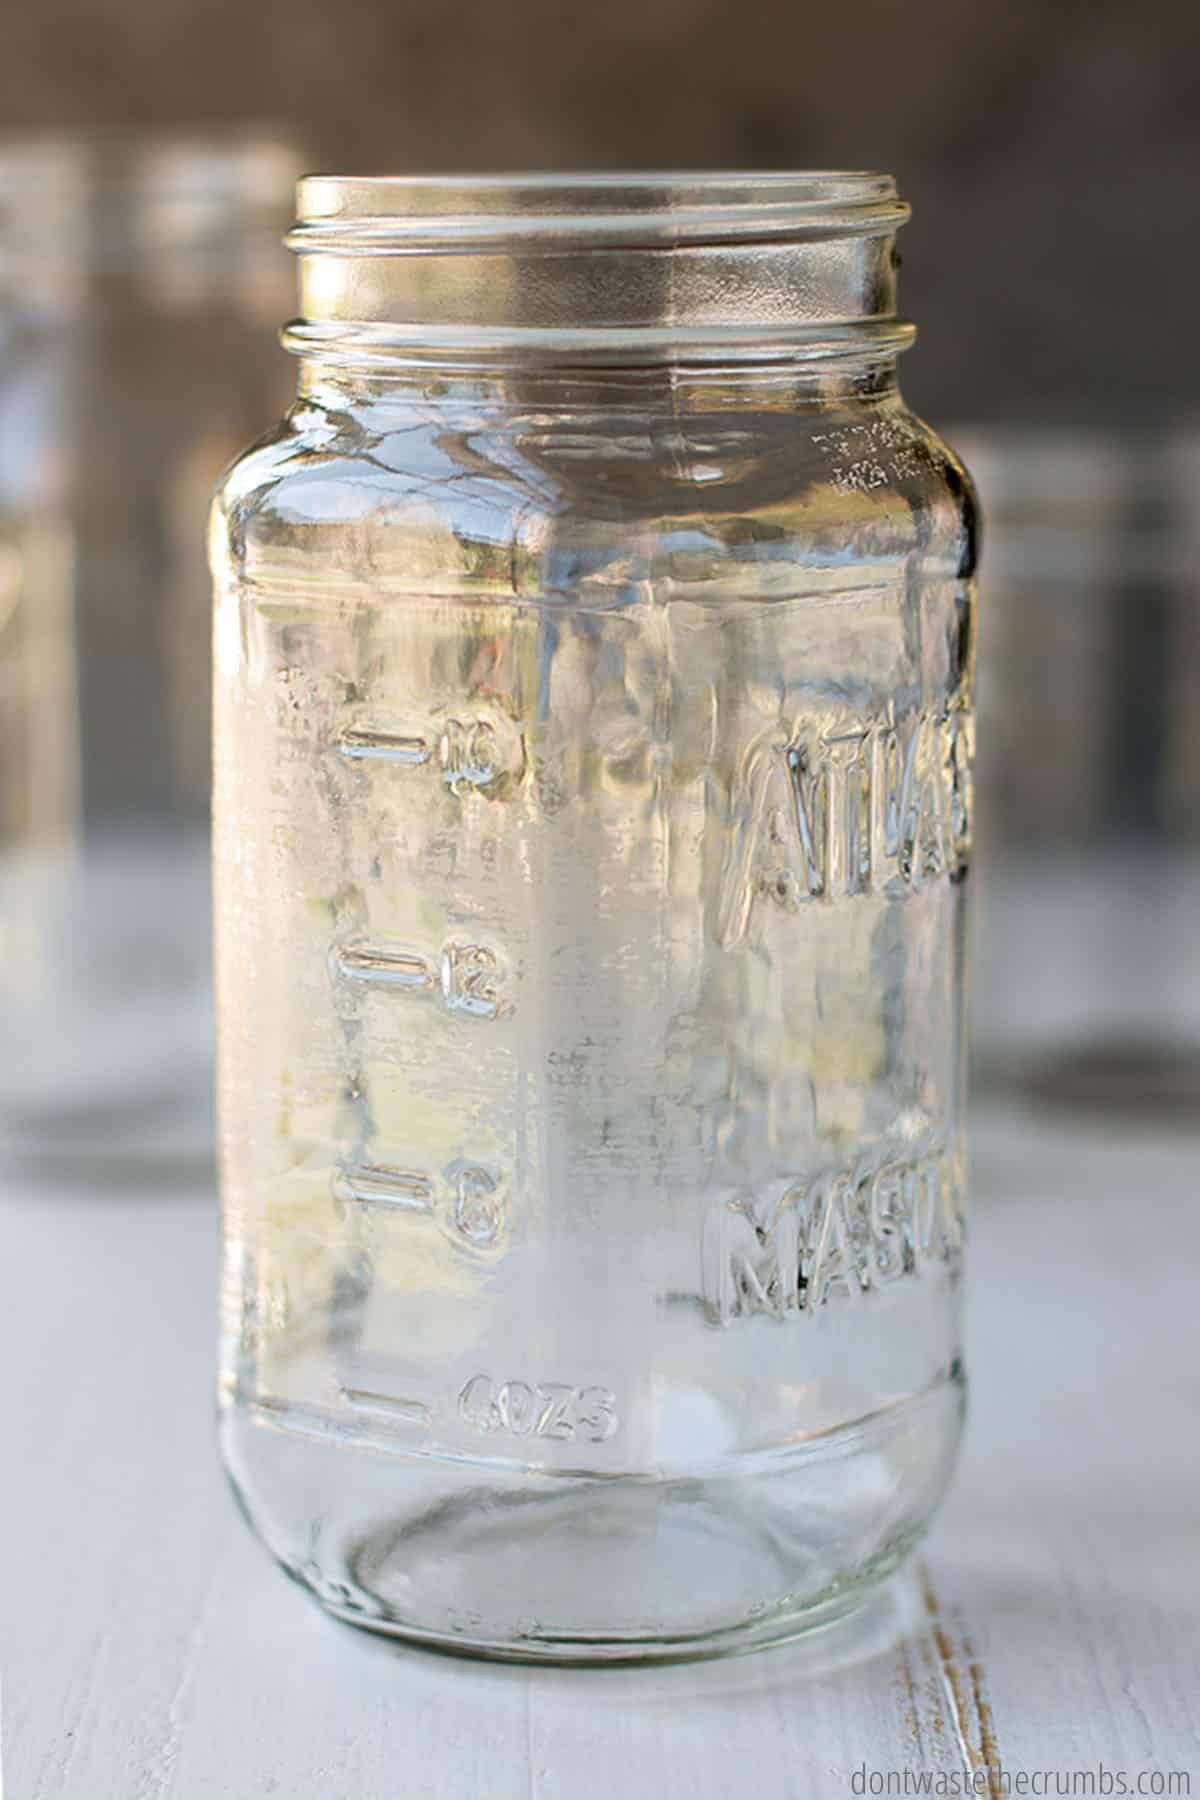 Freezing in Canning Jars 101 (Mason Jars) - Fillmore Container